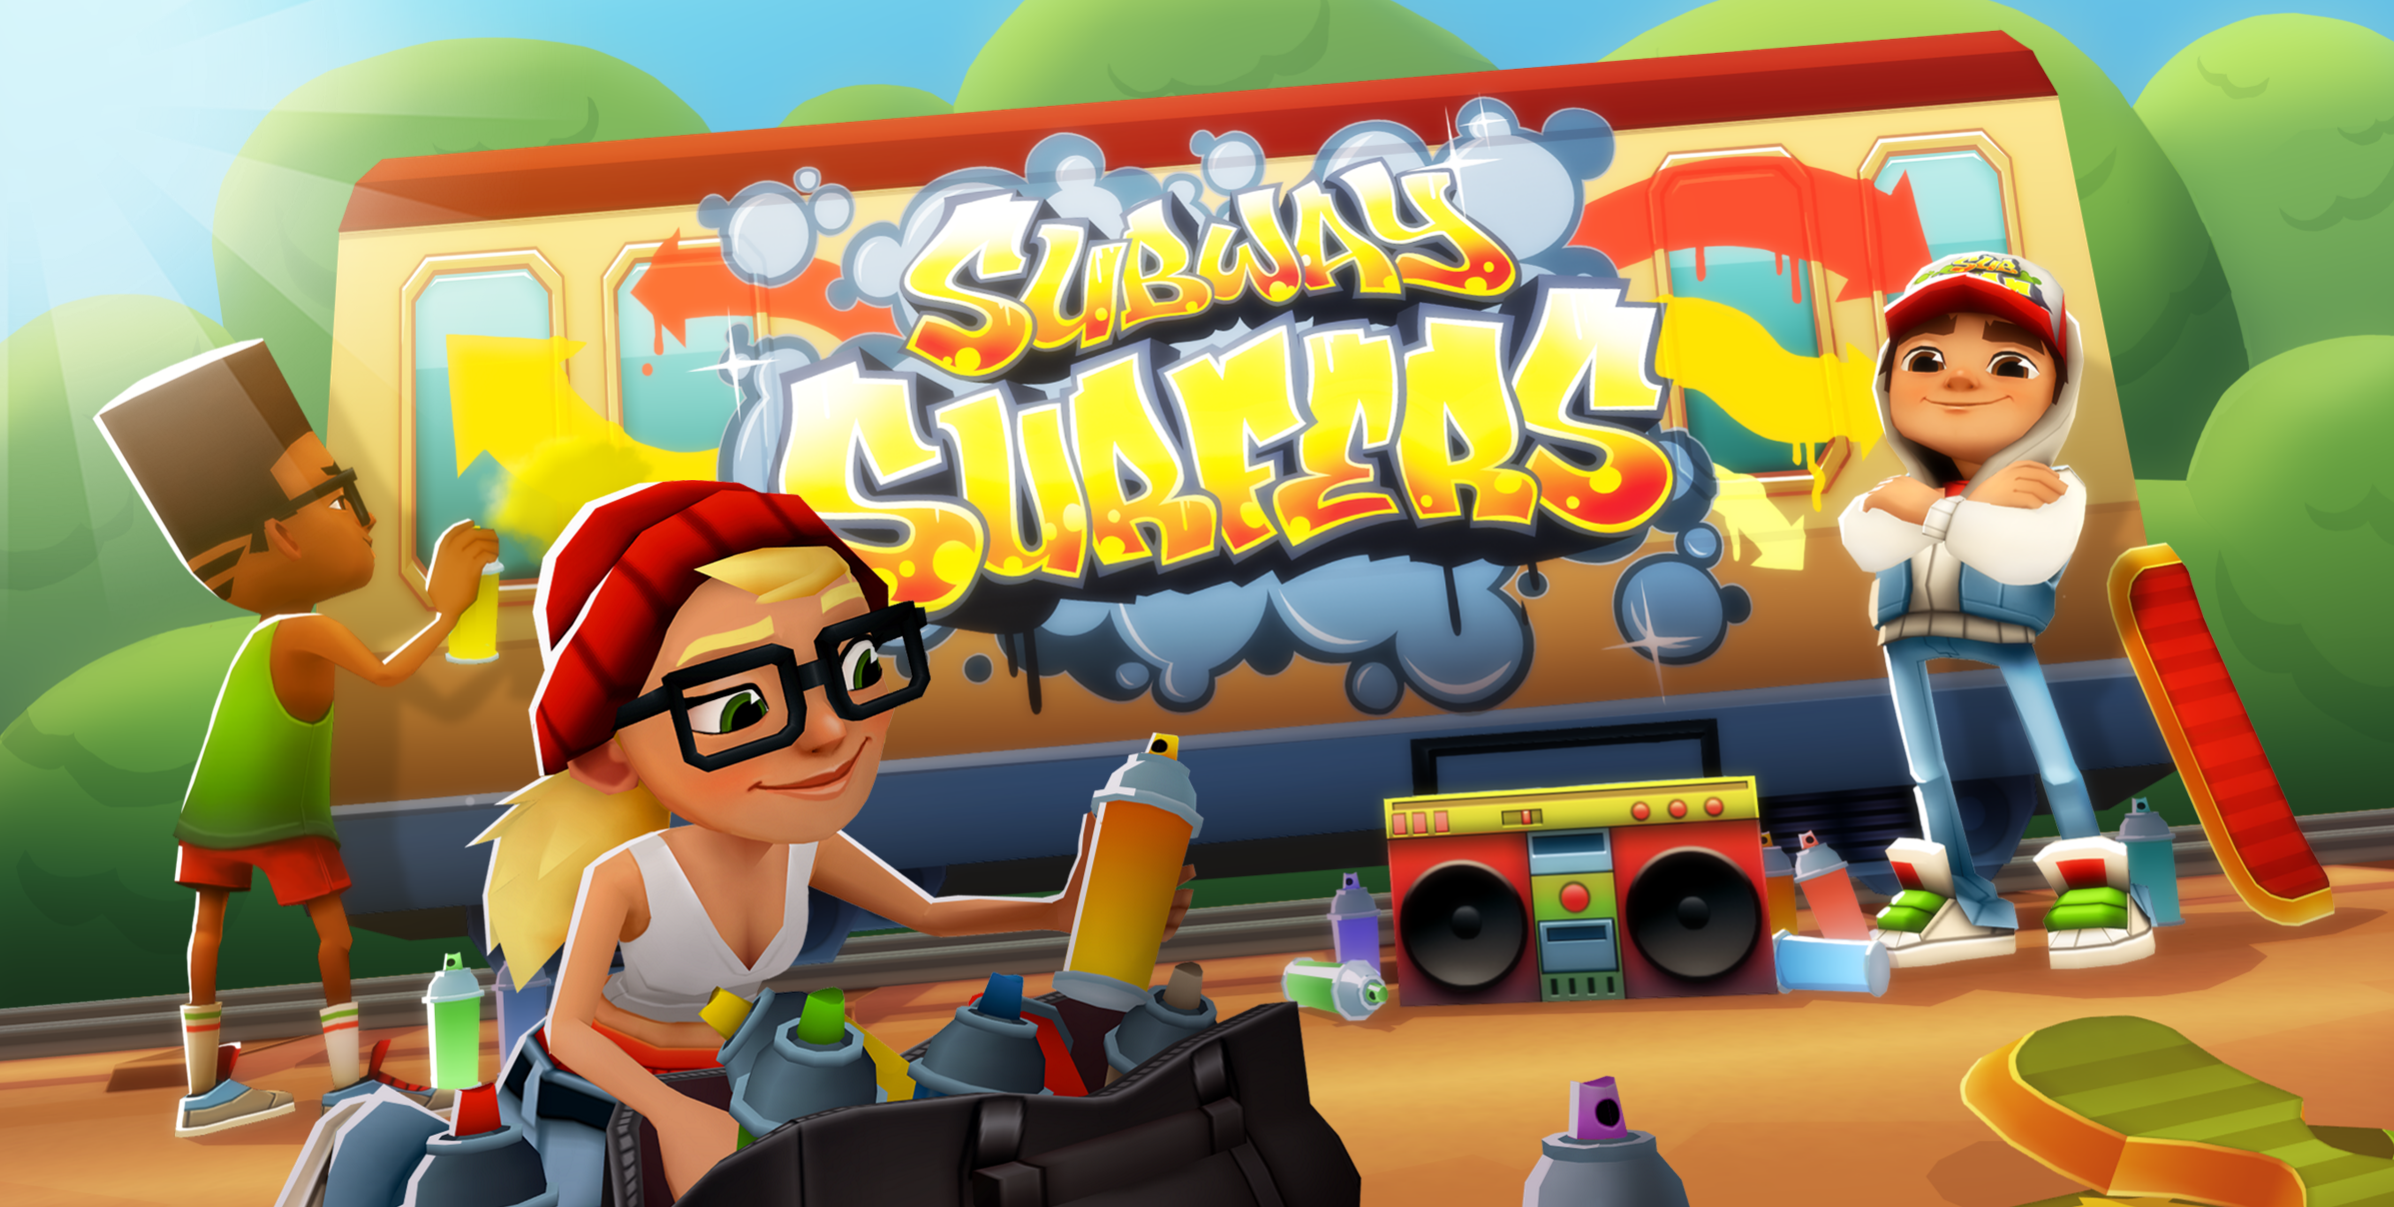 Subway Surfers - How to Get Free Keys and Gold Awards